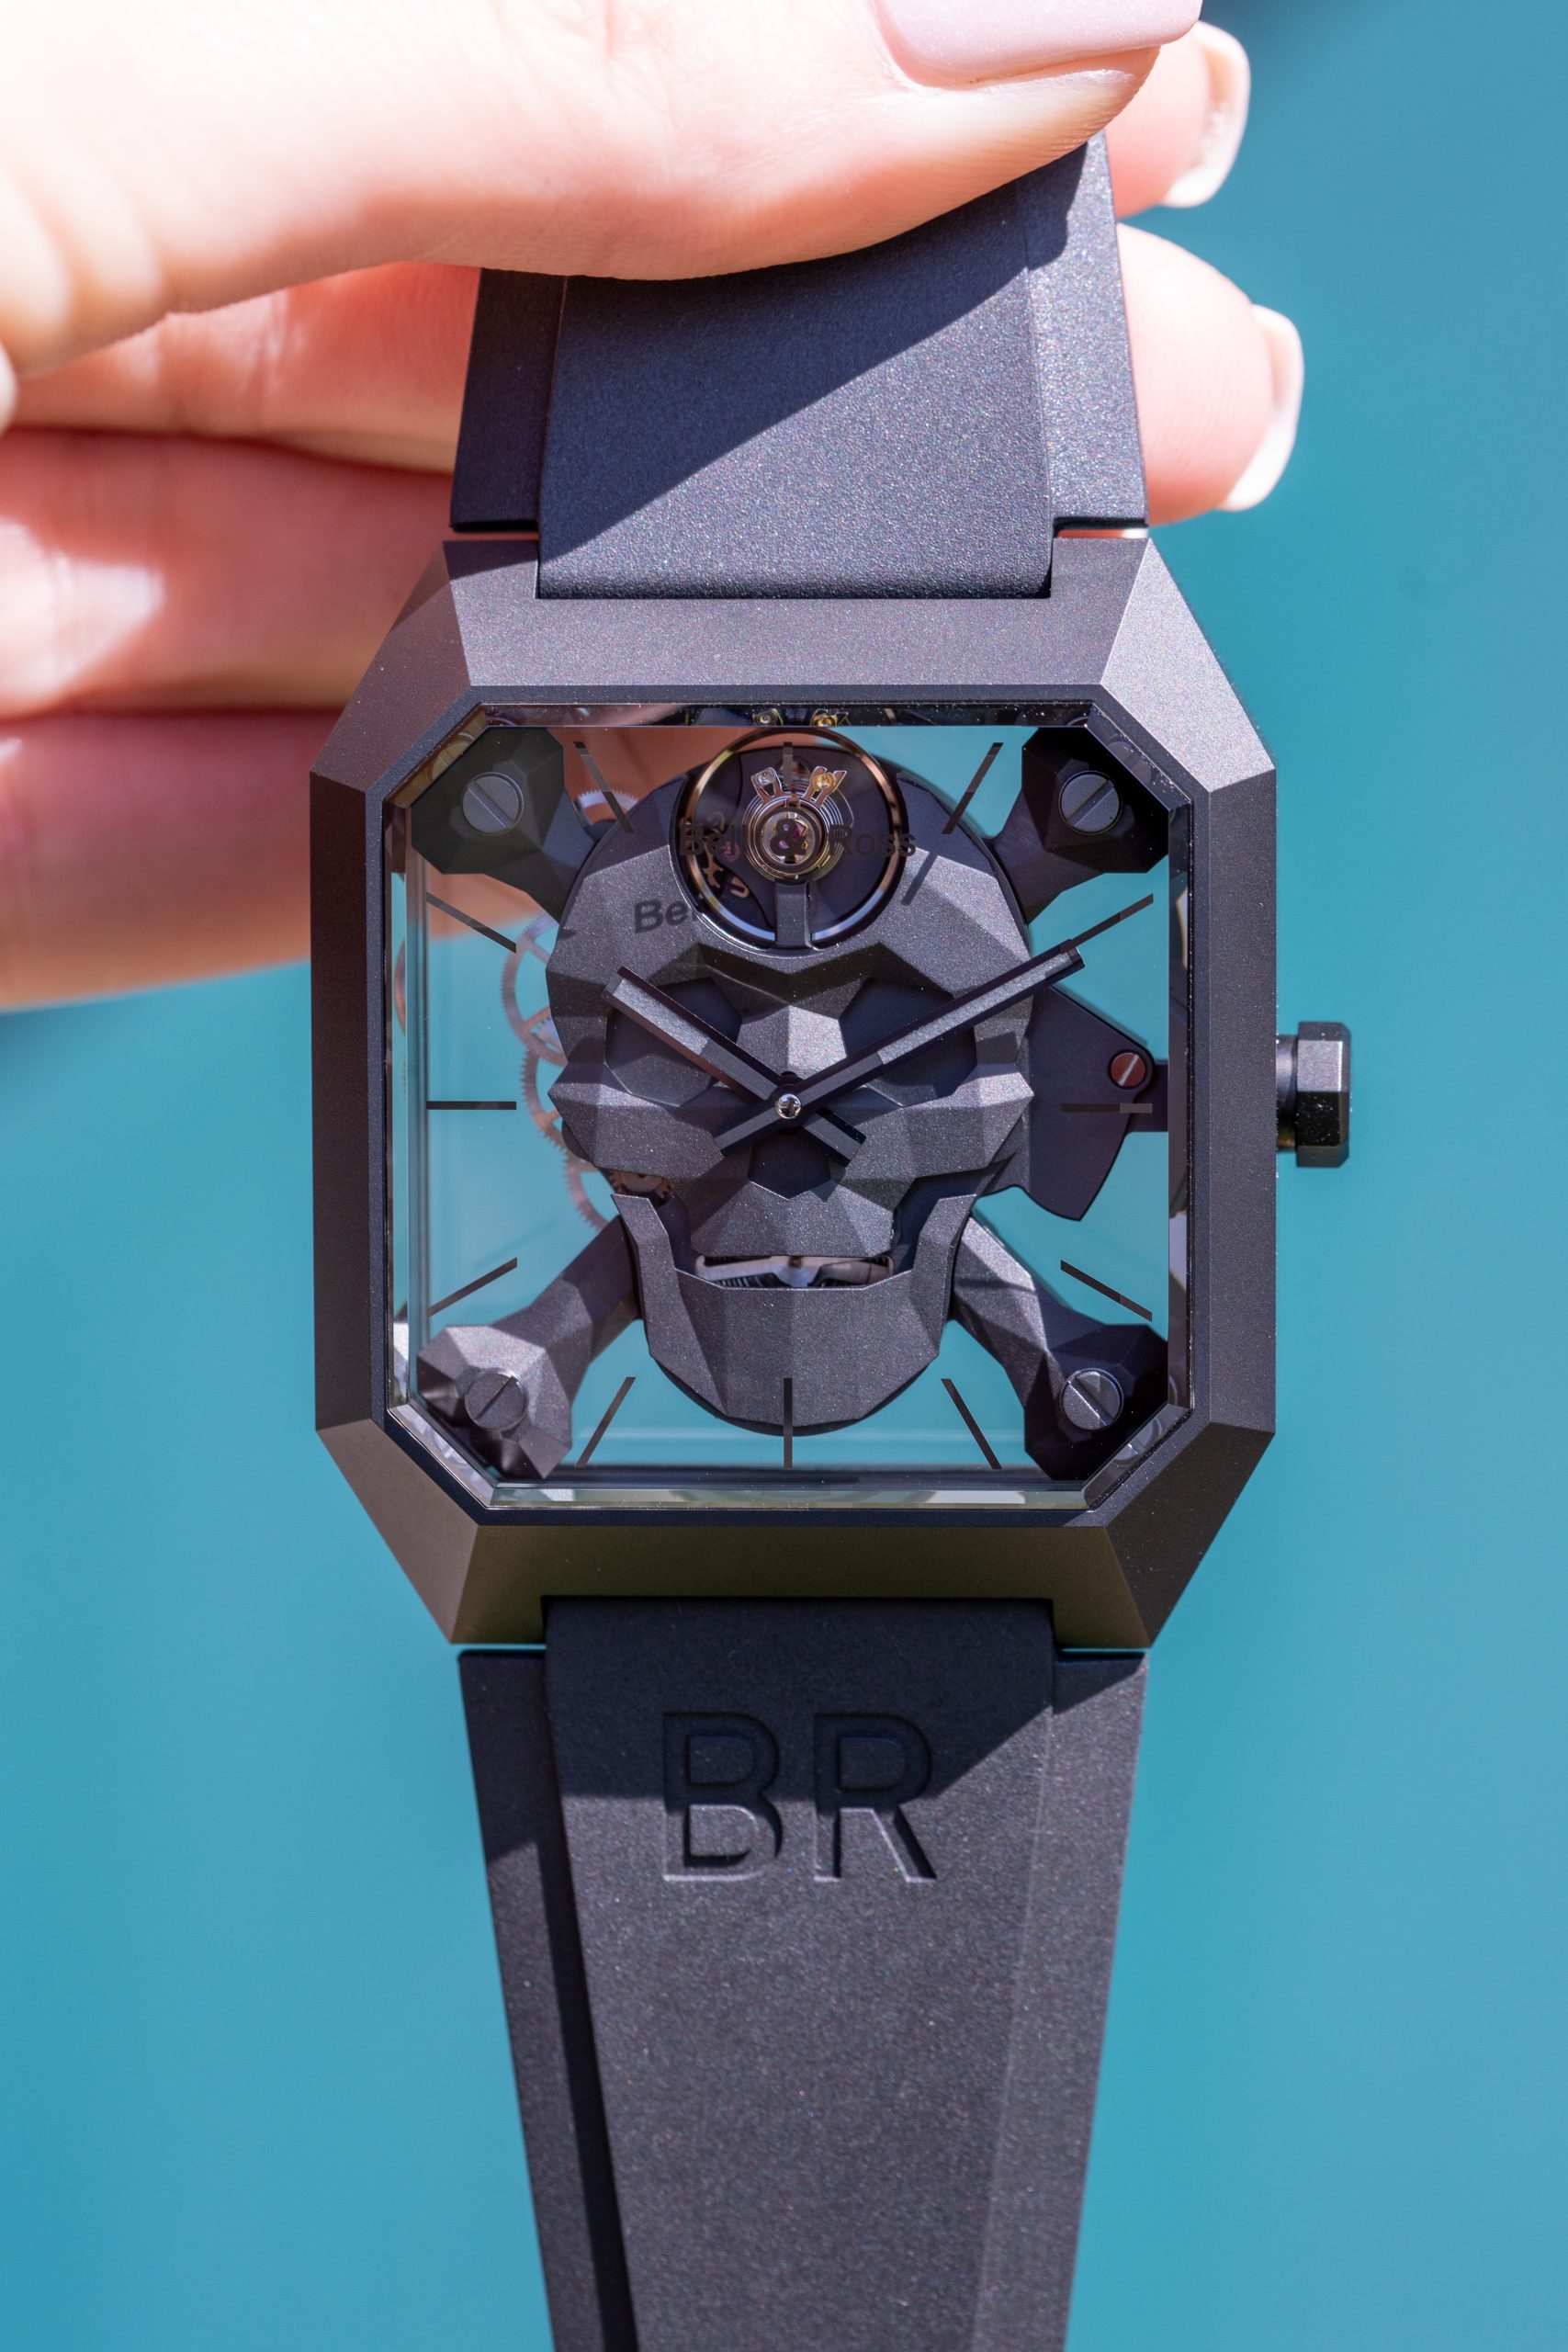 An Overview Of The Bell And Ross BR 01 Cyber Skull Wristwatch